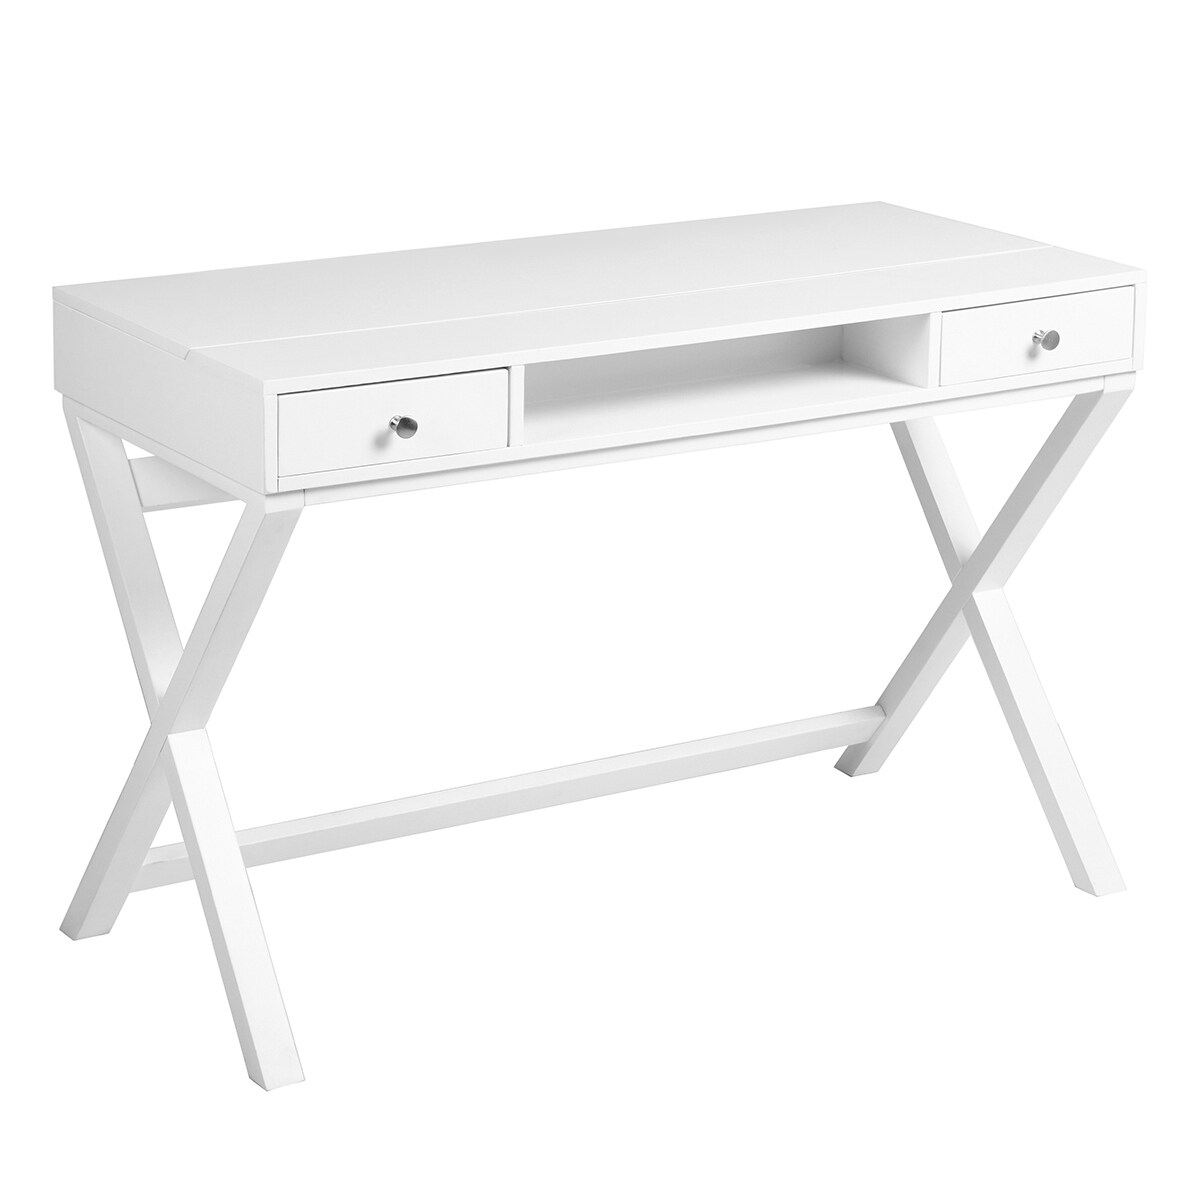 Lift Desk with 2 Drawer , Computer Desk for Home Office, Living Room